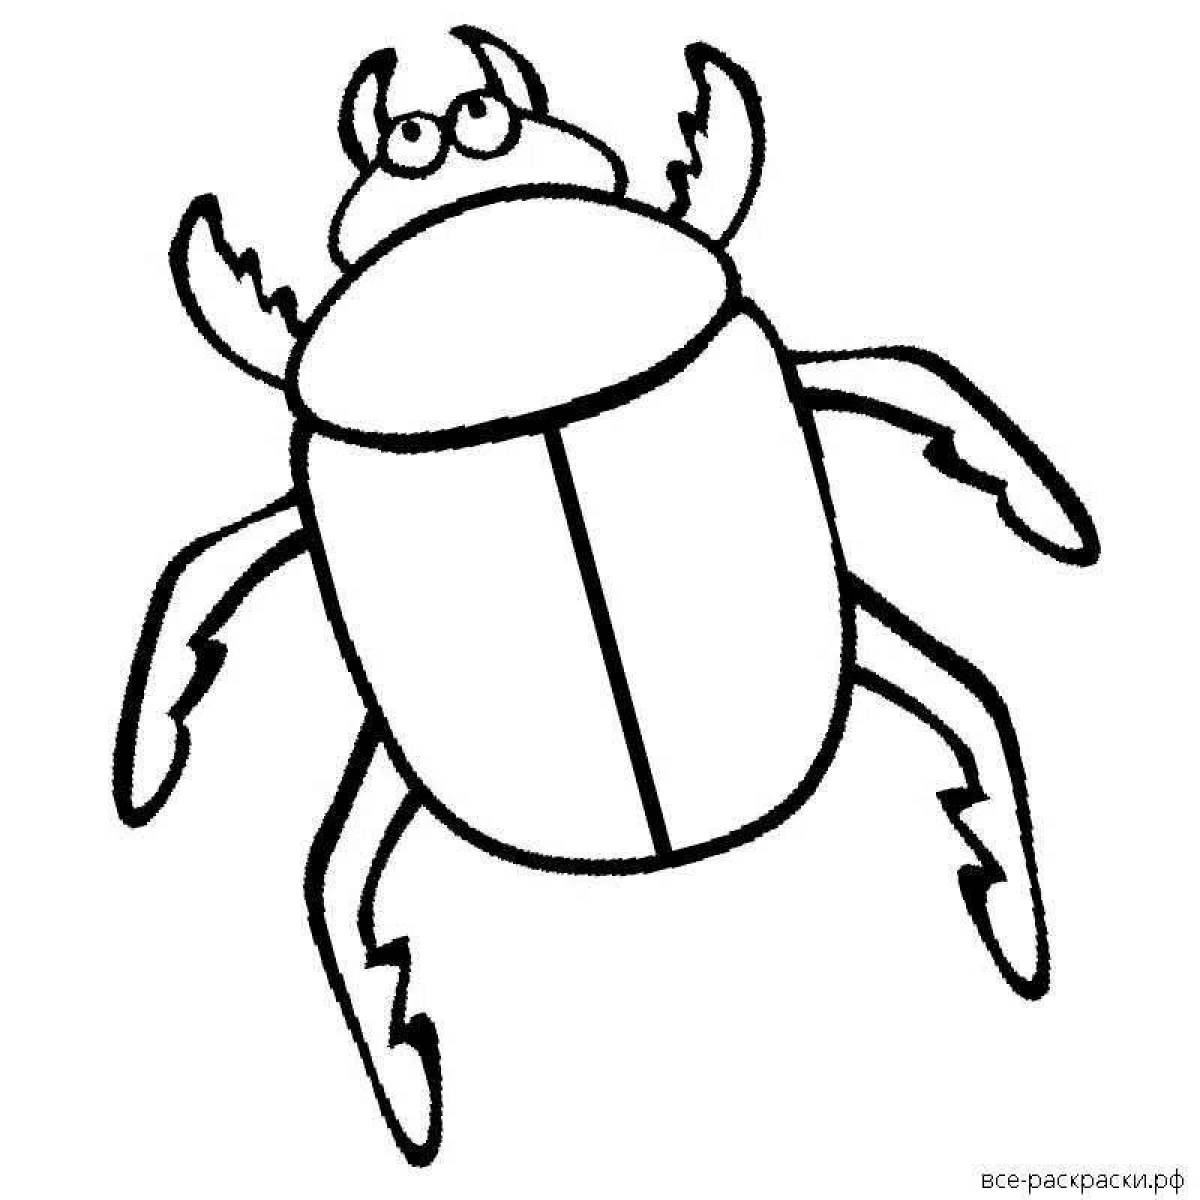 Incredible beetle coloring book for kids